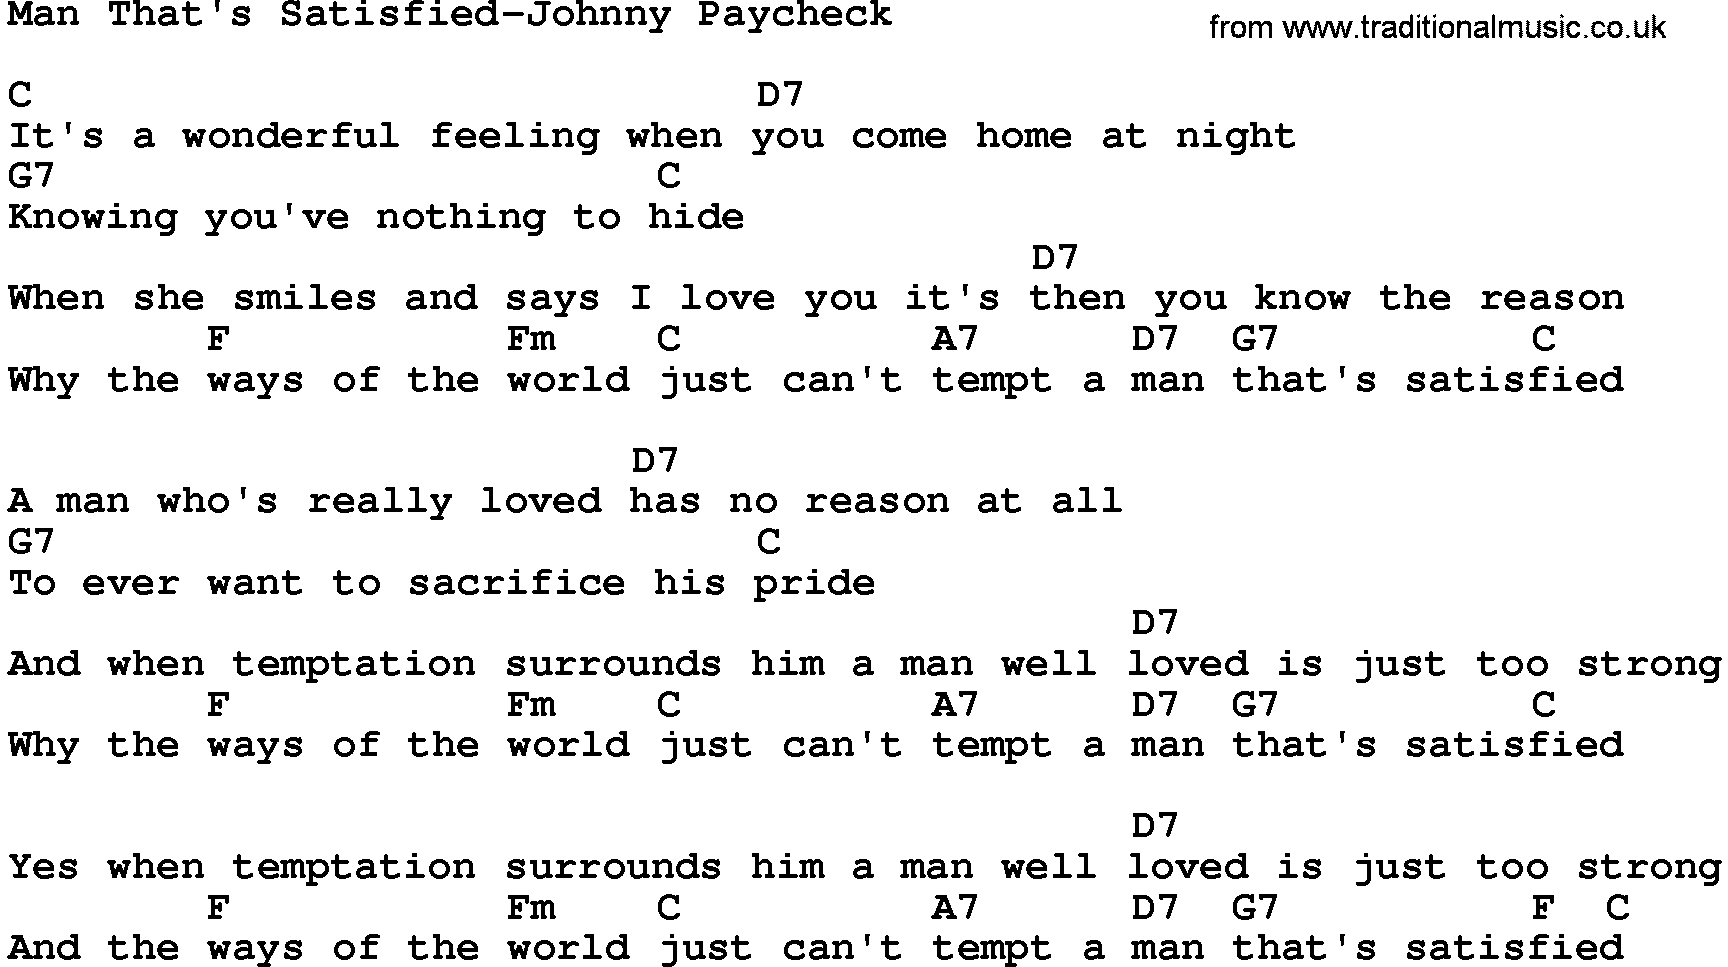 Country music song: Man That's Satisfied-Johnny Paycheck lyrics and chords